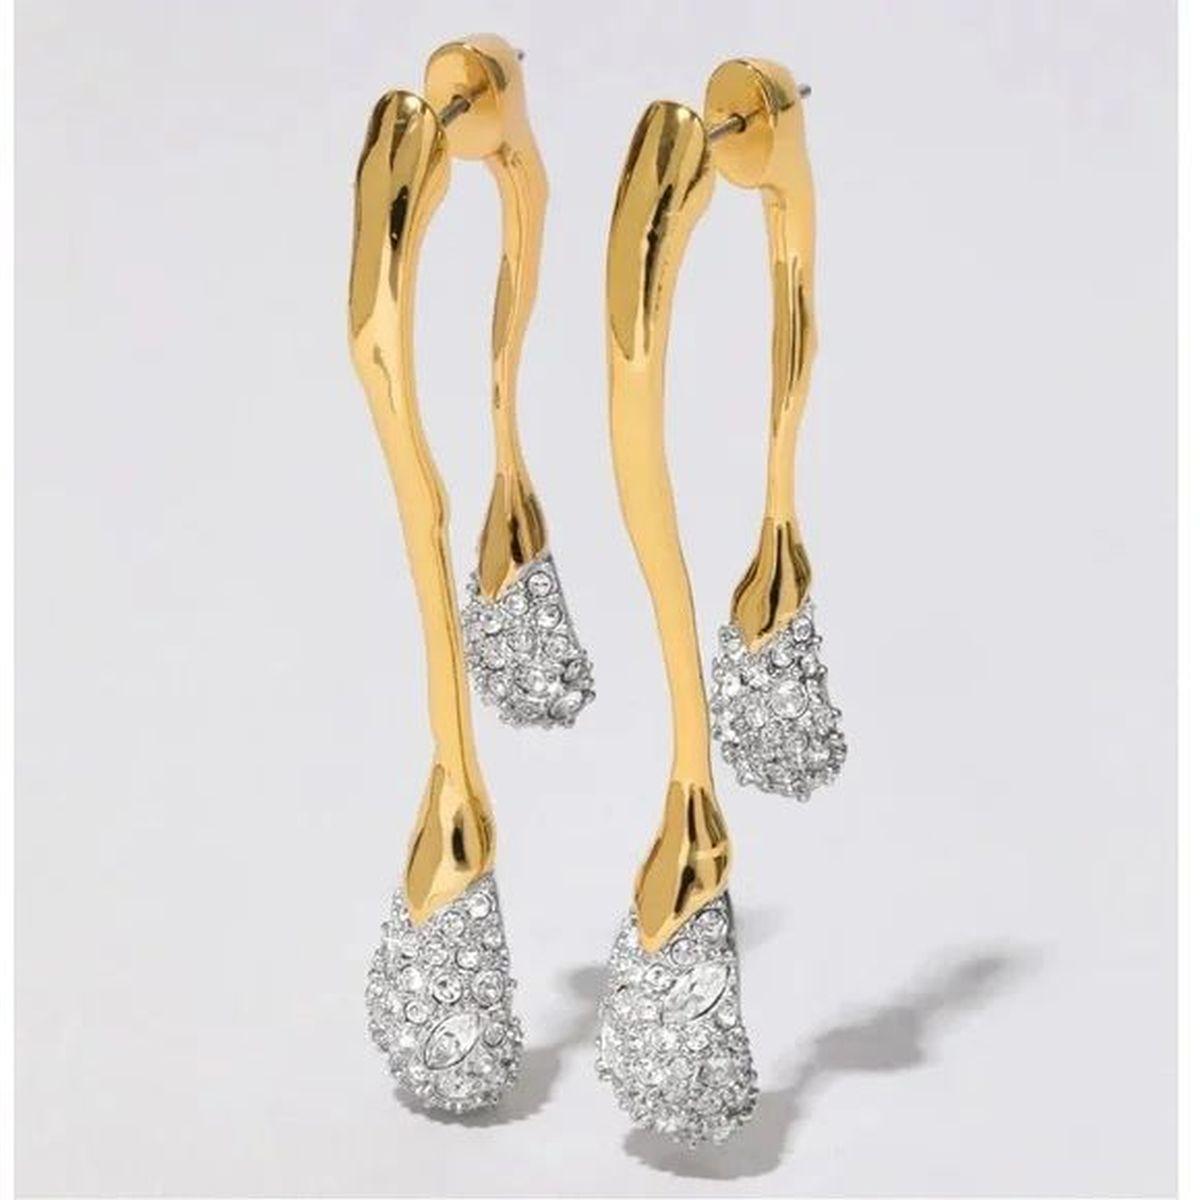 Simply Beautiful! Front to back Alexis Bittar Designer Silhouette Earrings. Designed with 14k Gold plated metal work melding into two Sculpted drops accented with meticulously Hand-set pave Crystals. Hand crafted 14K Gold and Rhodium plated brass;